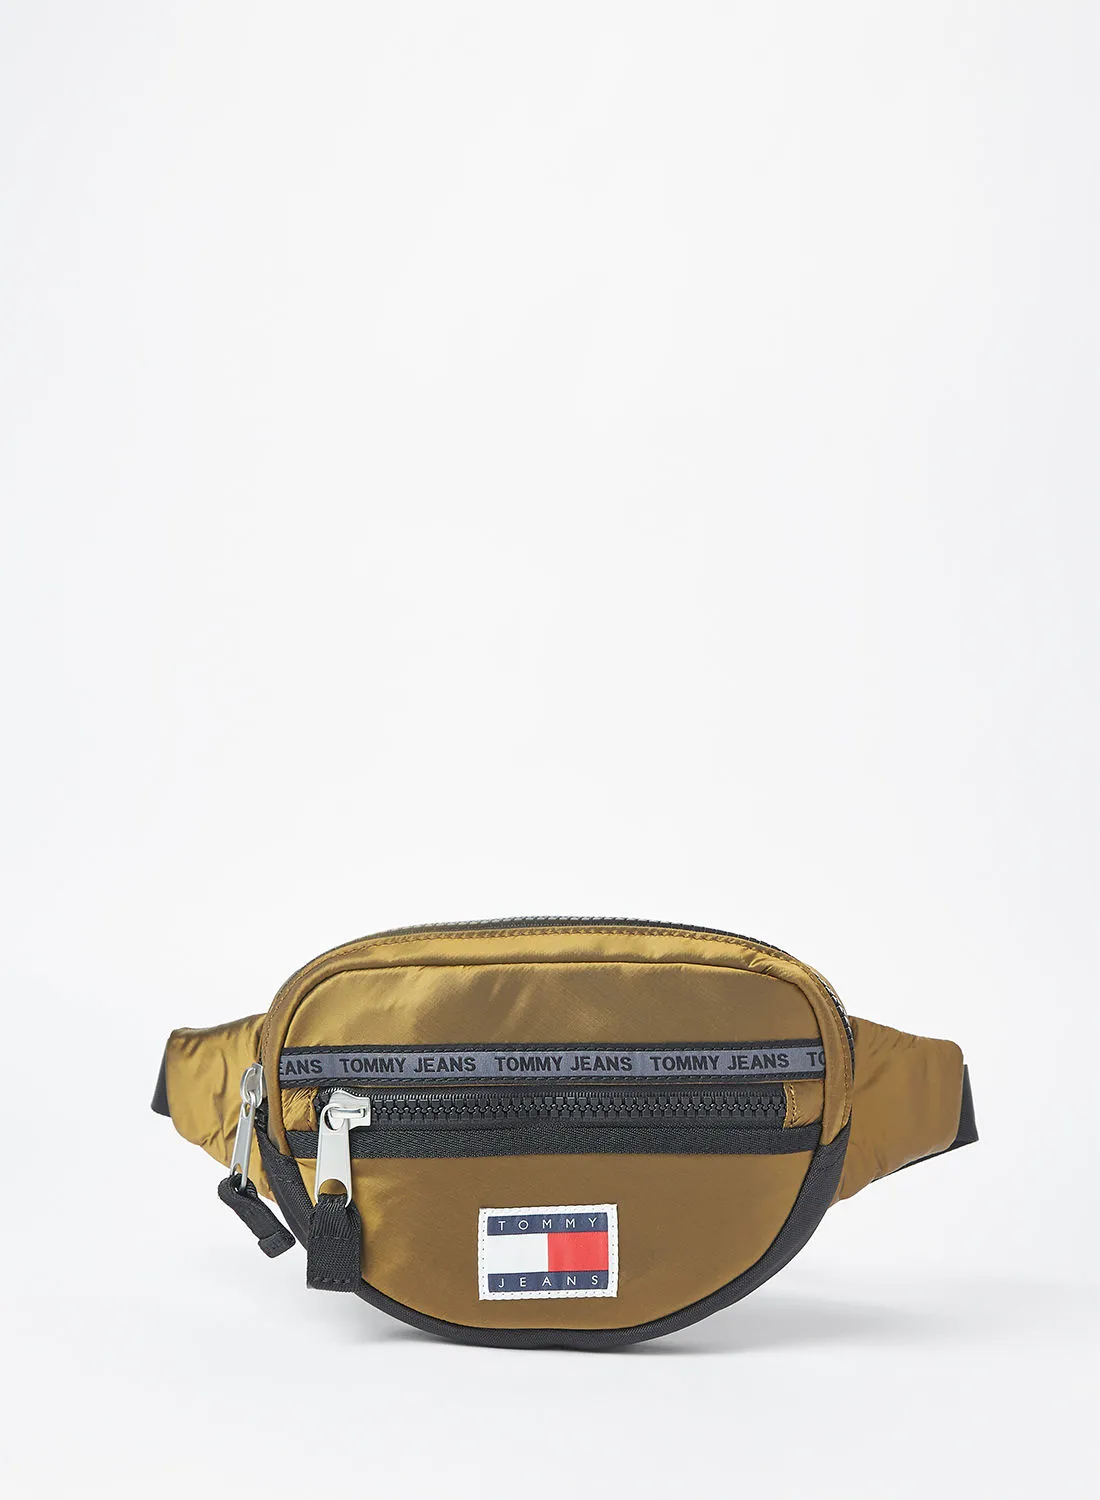 TOMMY JEANS Logo Waistbag Yellow